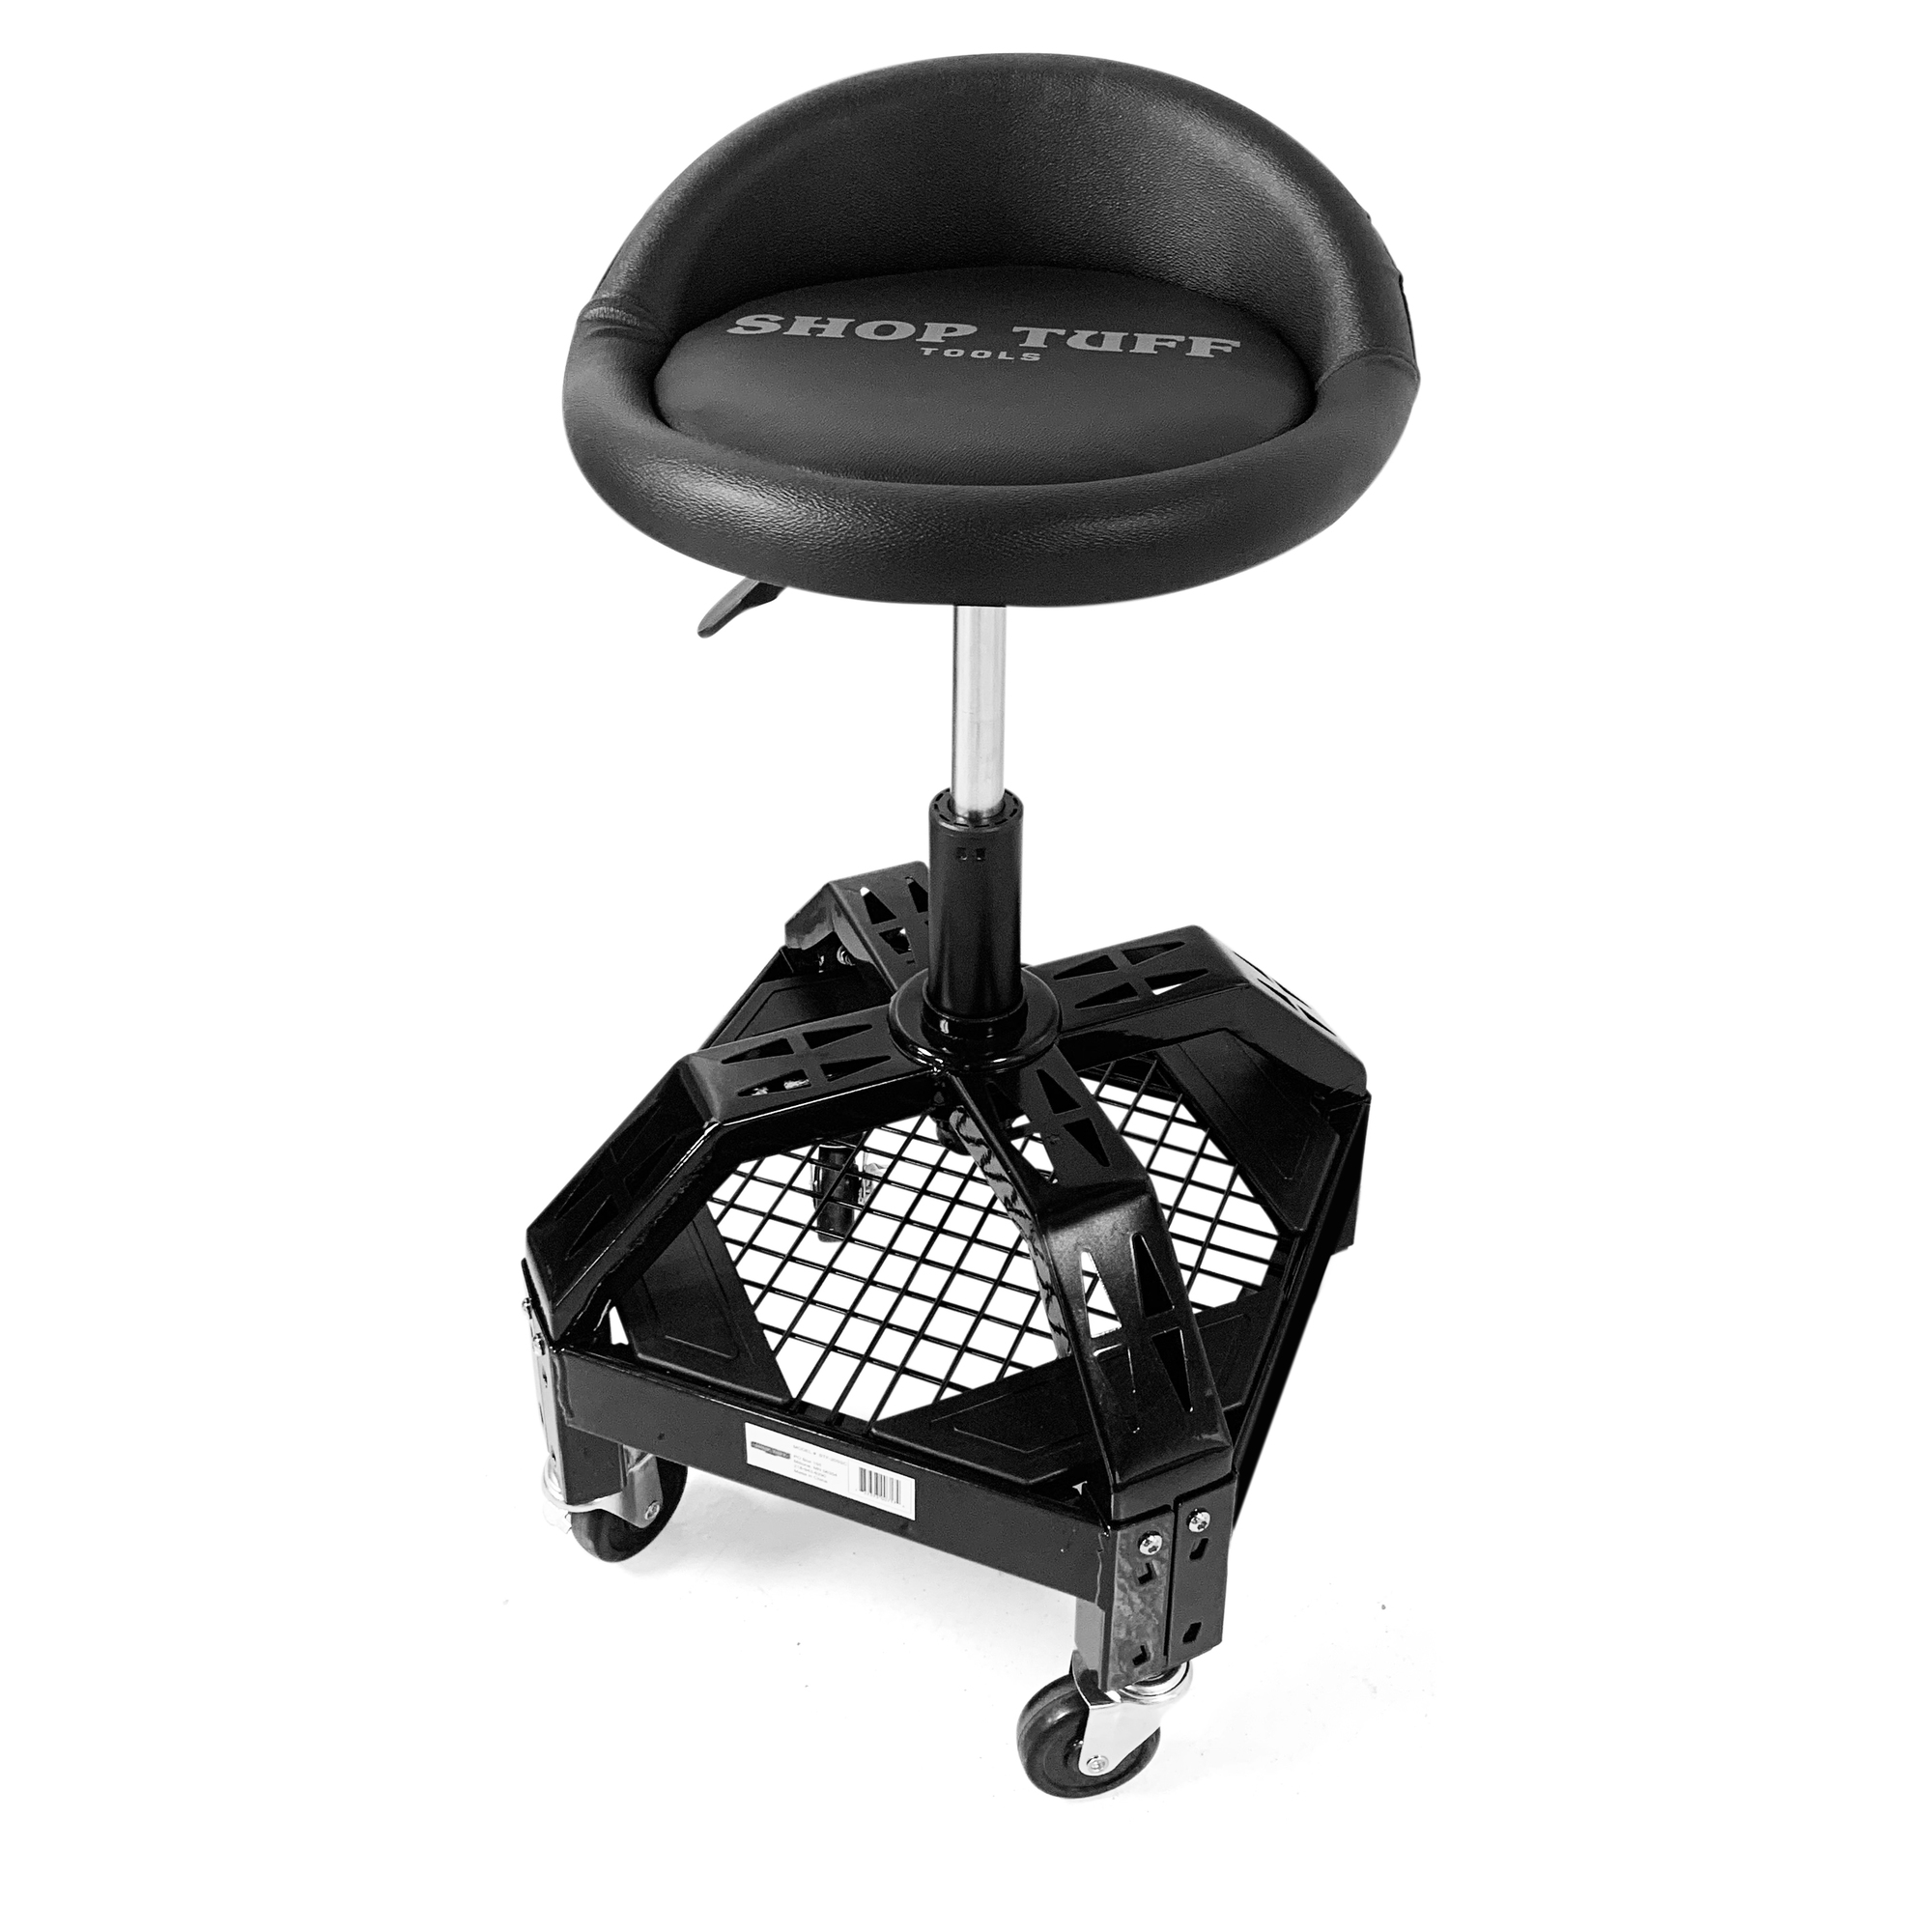 Shop Tuff, Deluxe Shop Stool, Capacity 270 lb, Max. Height 26.96 in, MInch Height 22.24 in, Model STF-20SSC